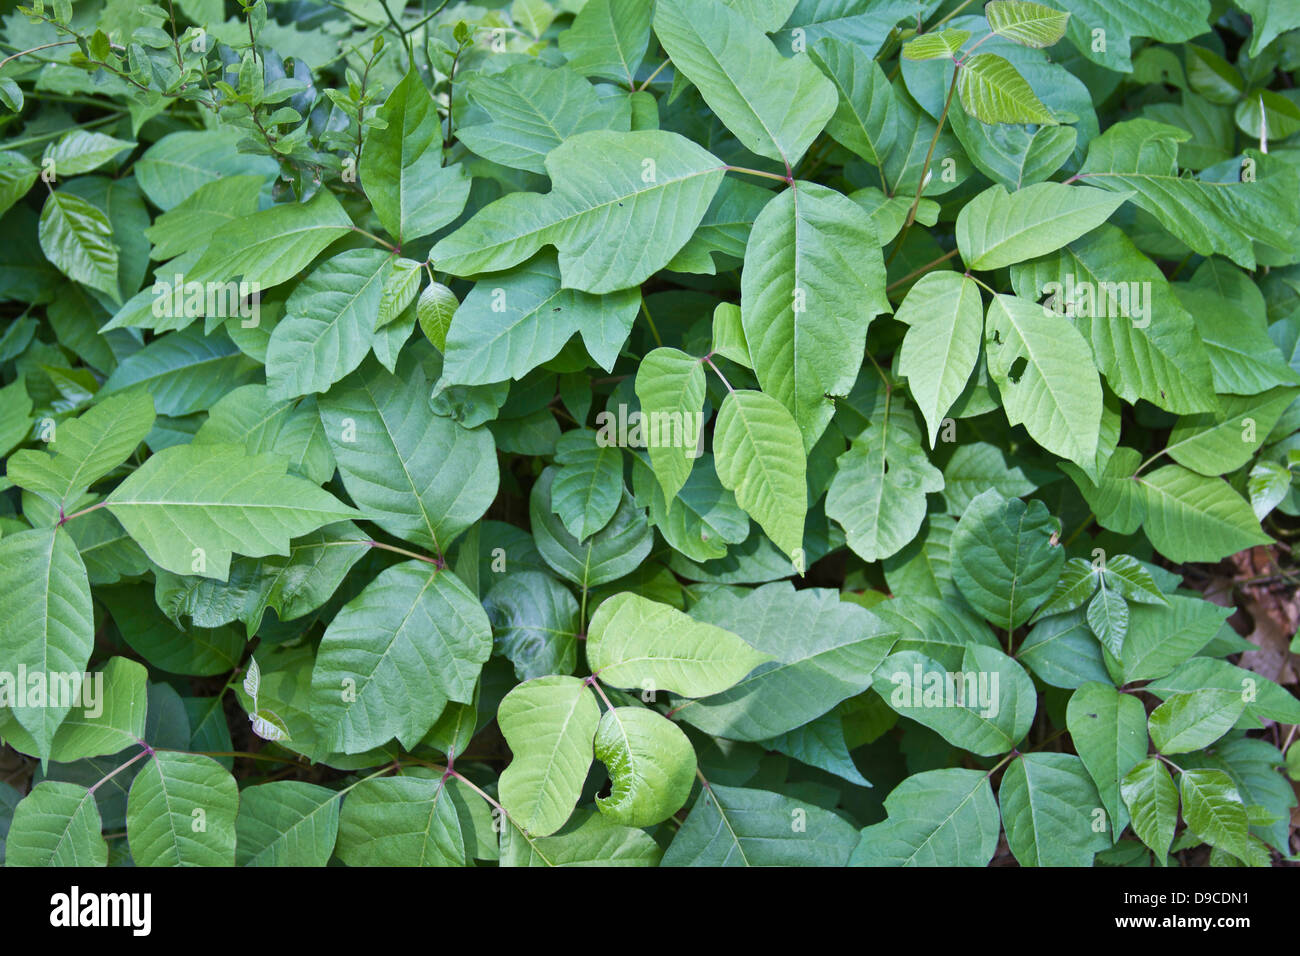 A thick patch of thrivy poison ivy plants Stock Photo